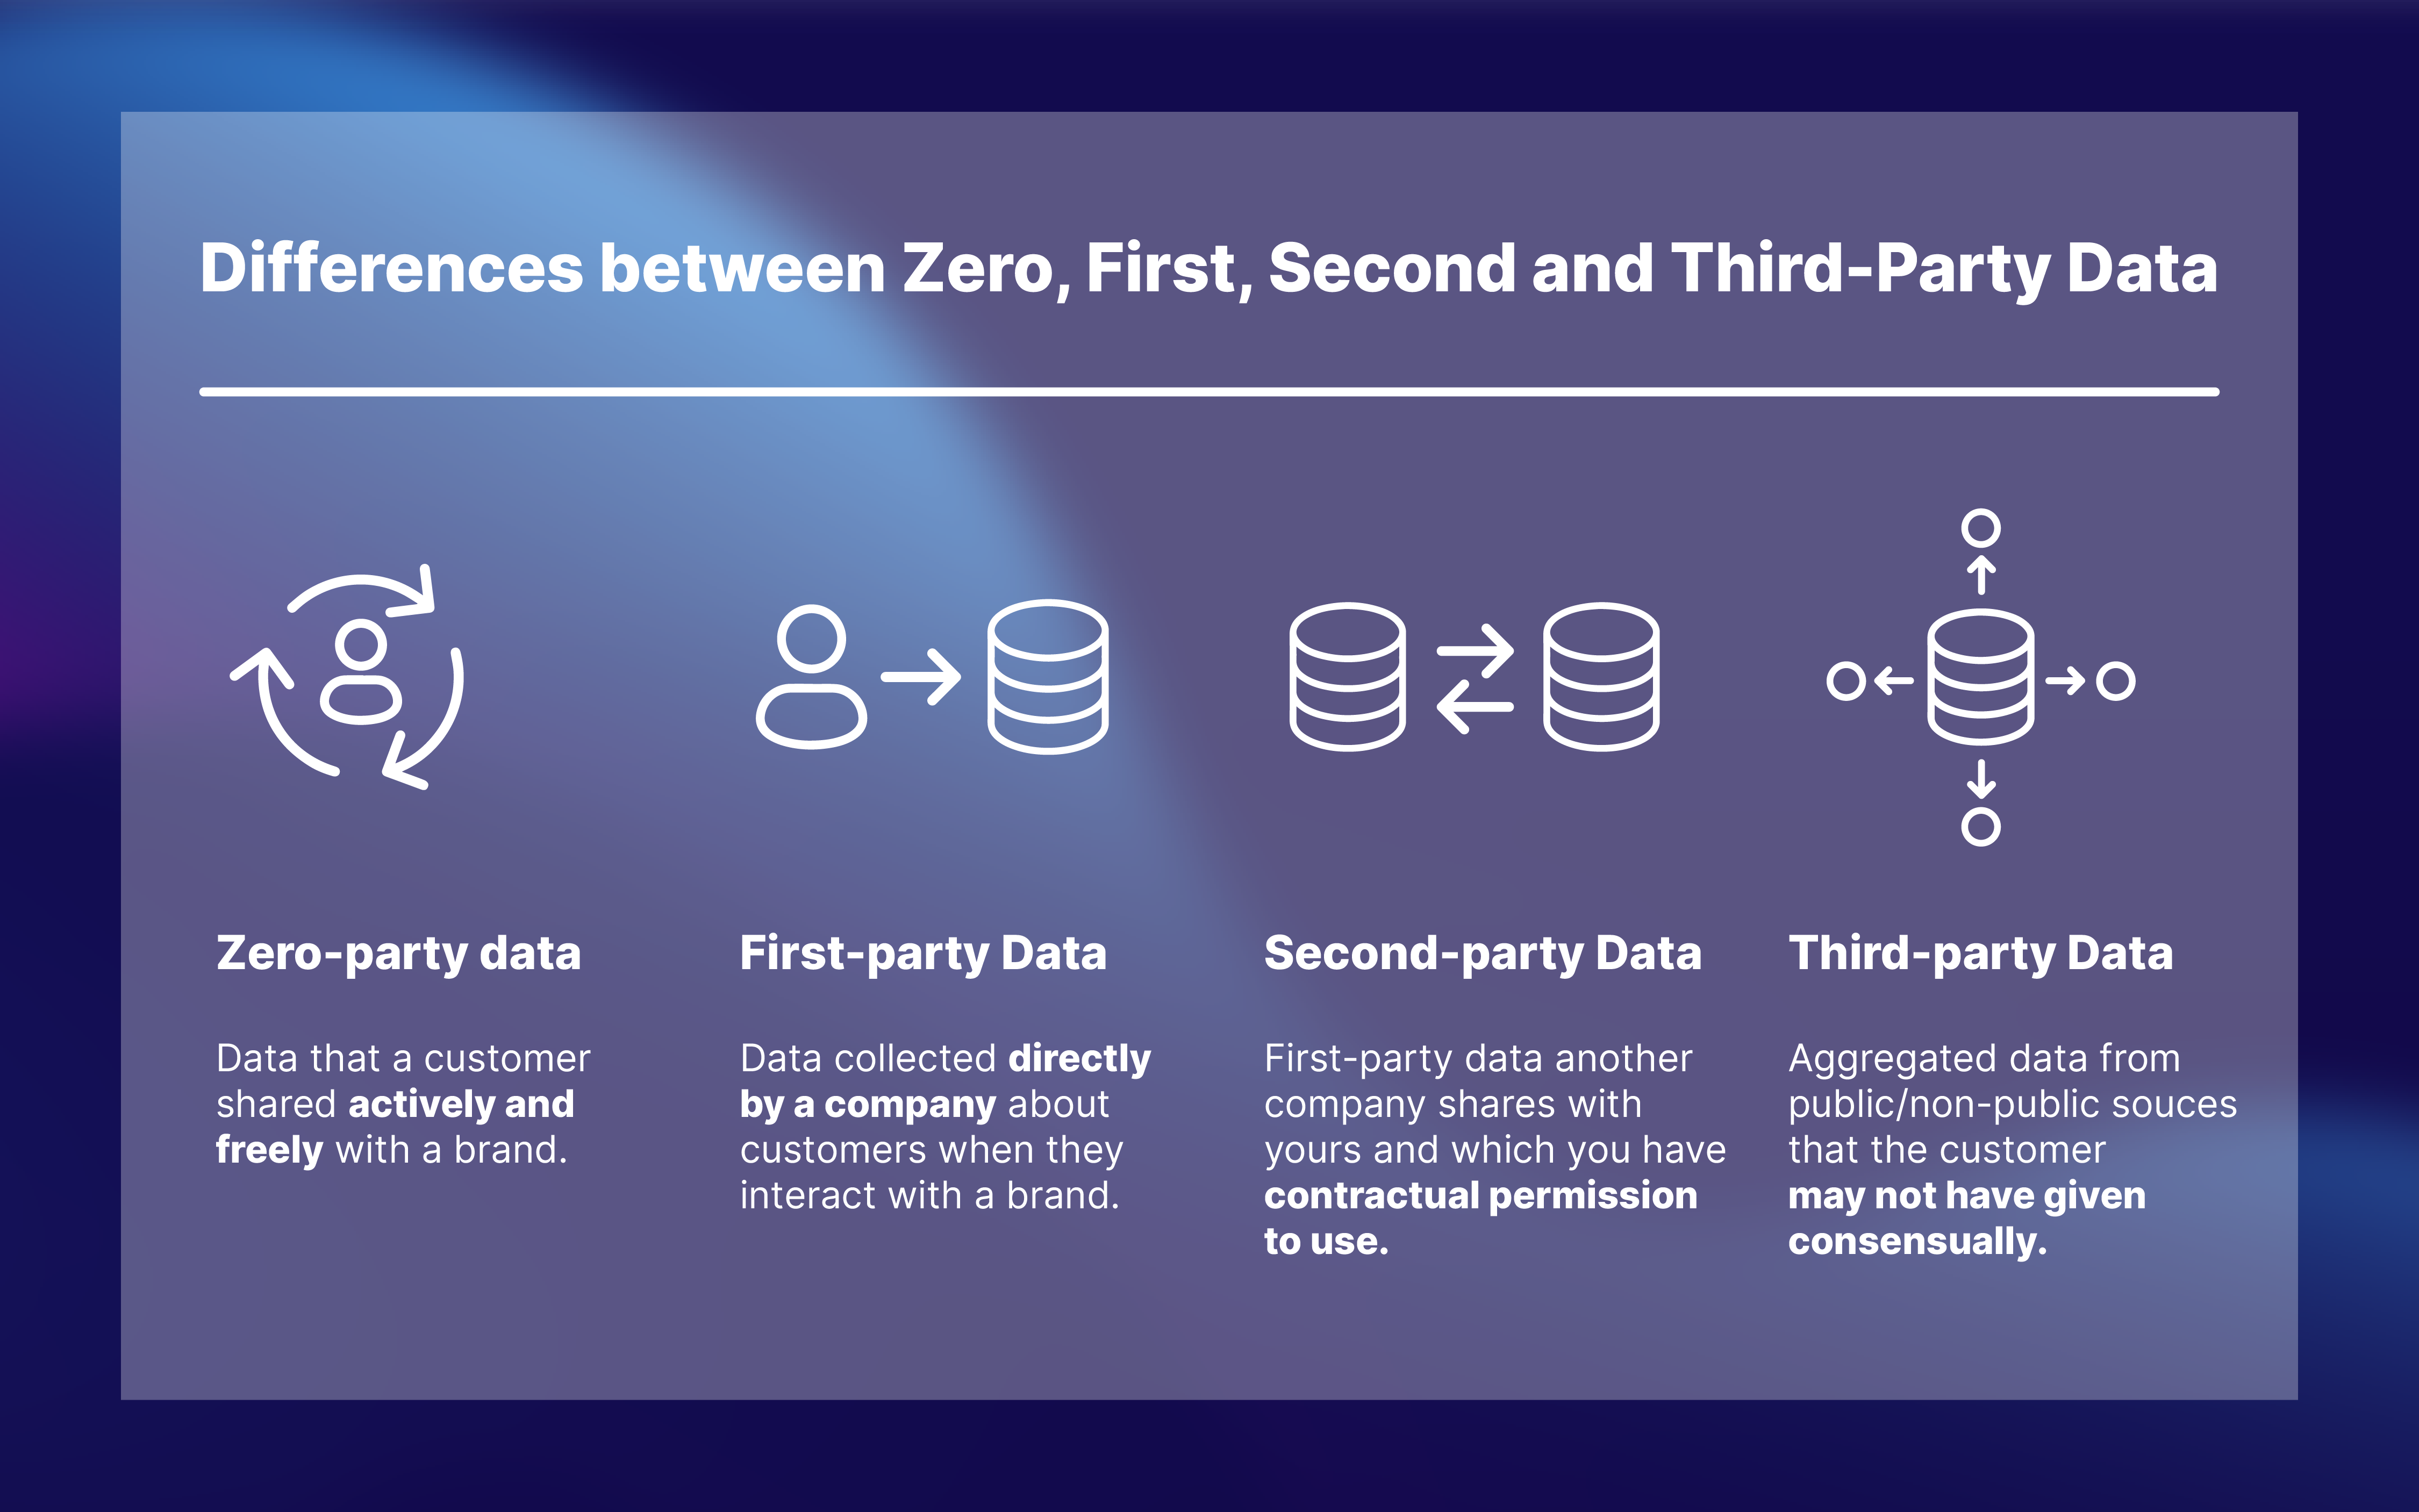 Differences between zero-party, first-party, second-party and third-party data